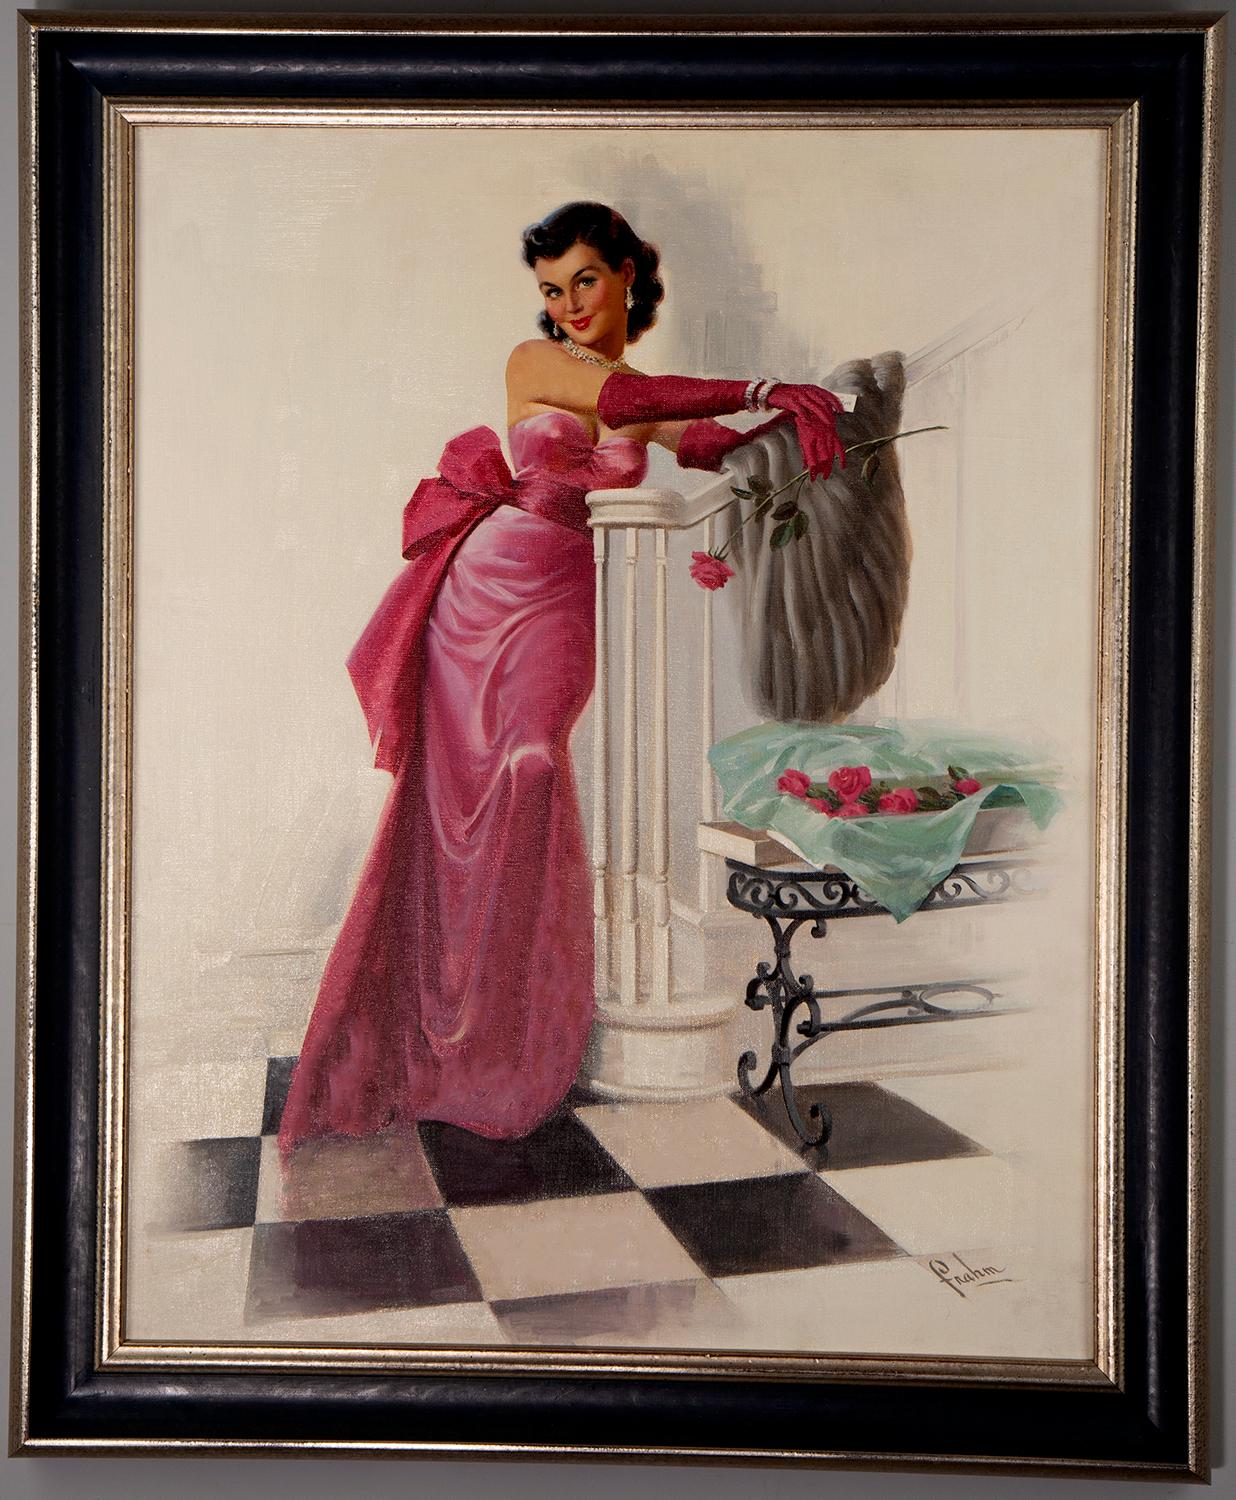 Roses From You - Painting by Art Frahm